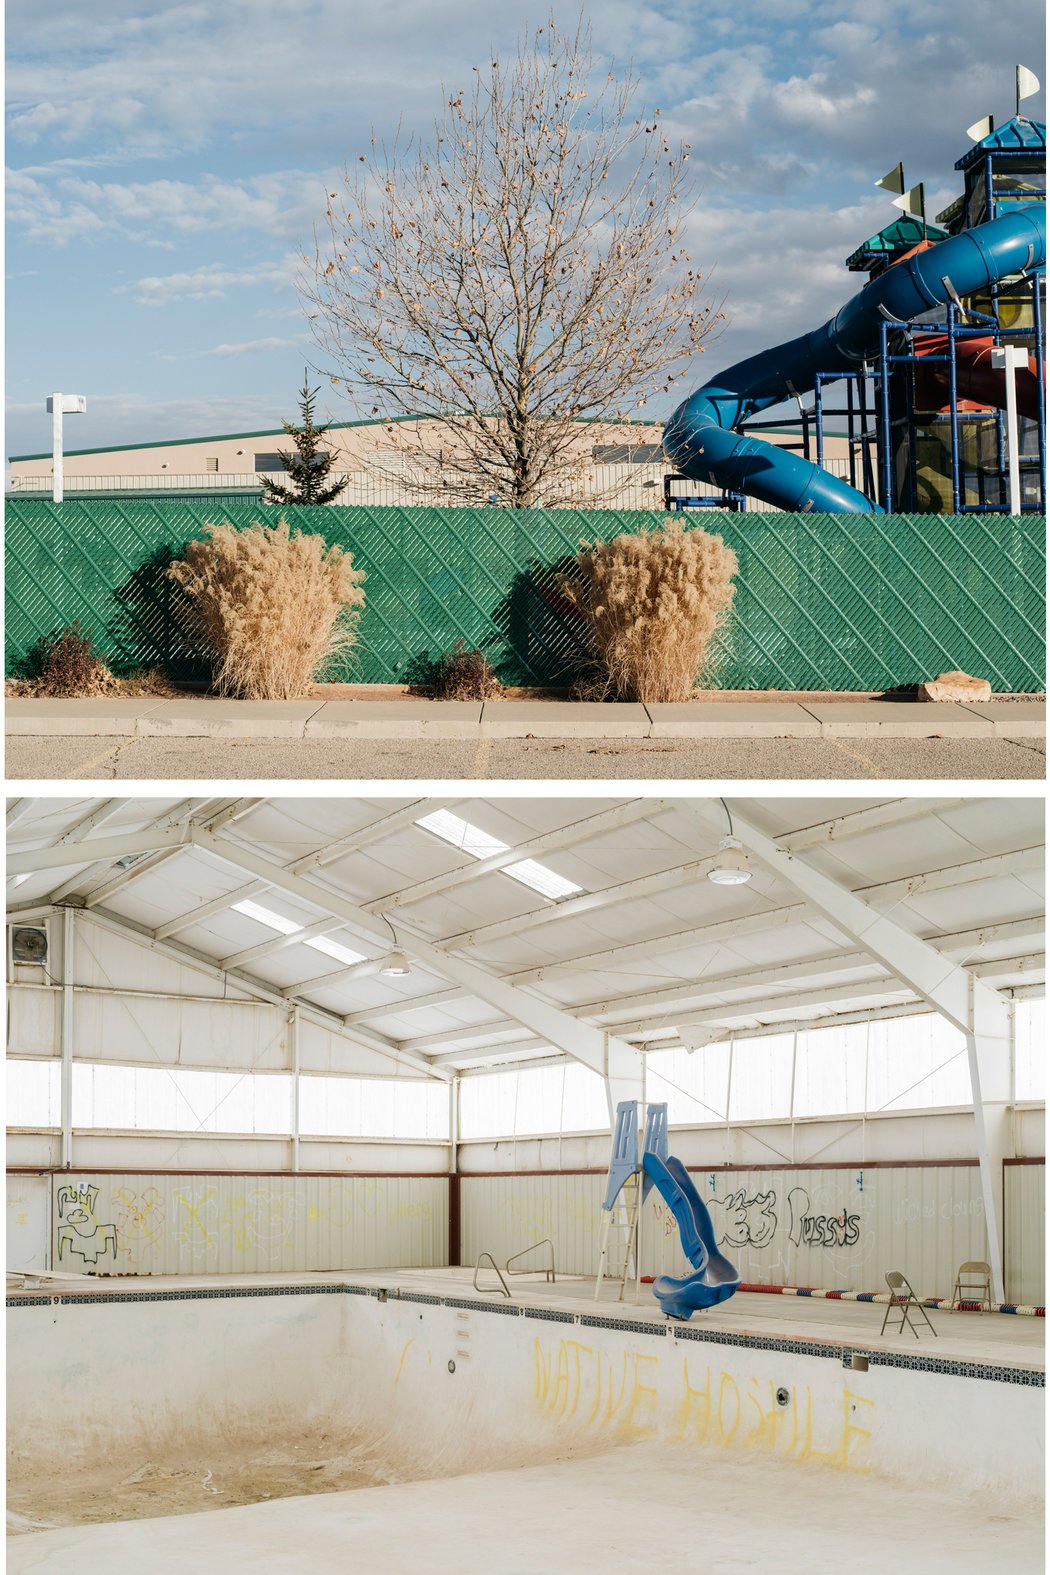 Top, the San Juan County Wellness Center in the northern part of the county; below, the closed swimming pool in the south. Credit Benjamin Rasmussen for The New York Times